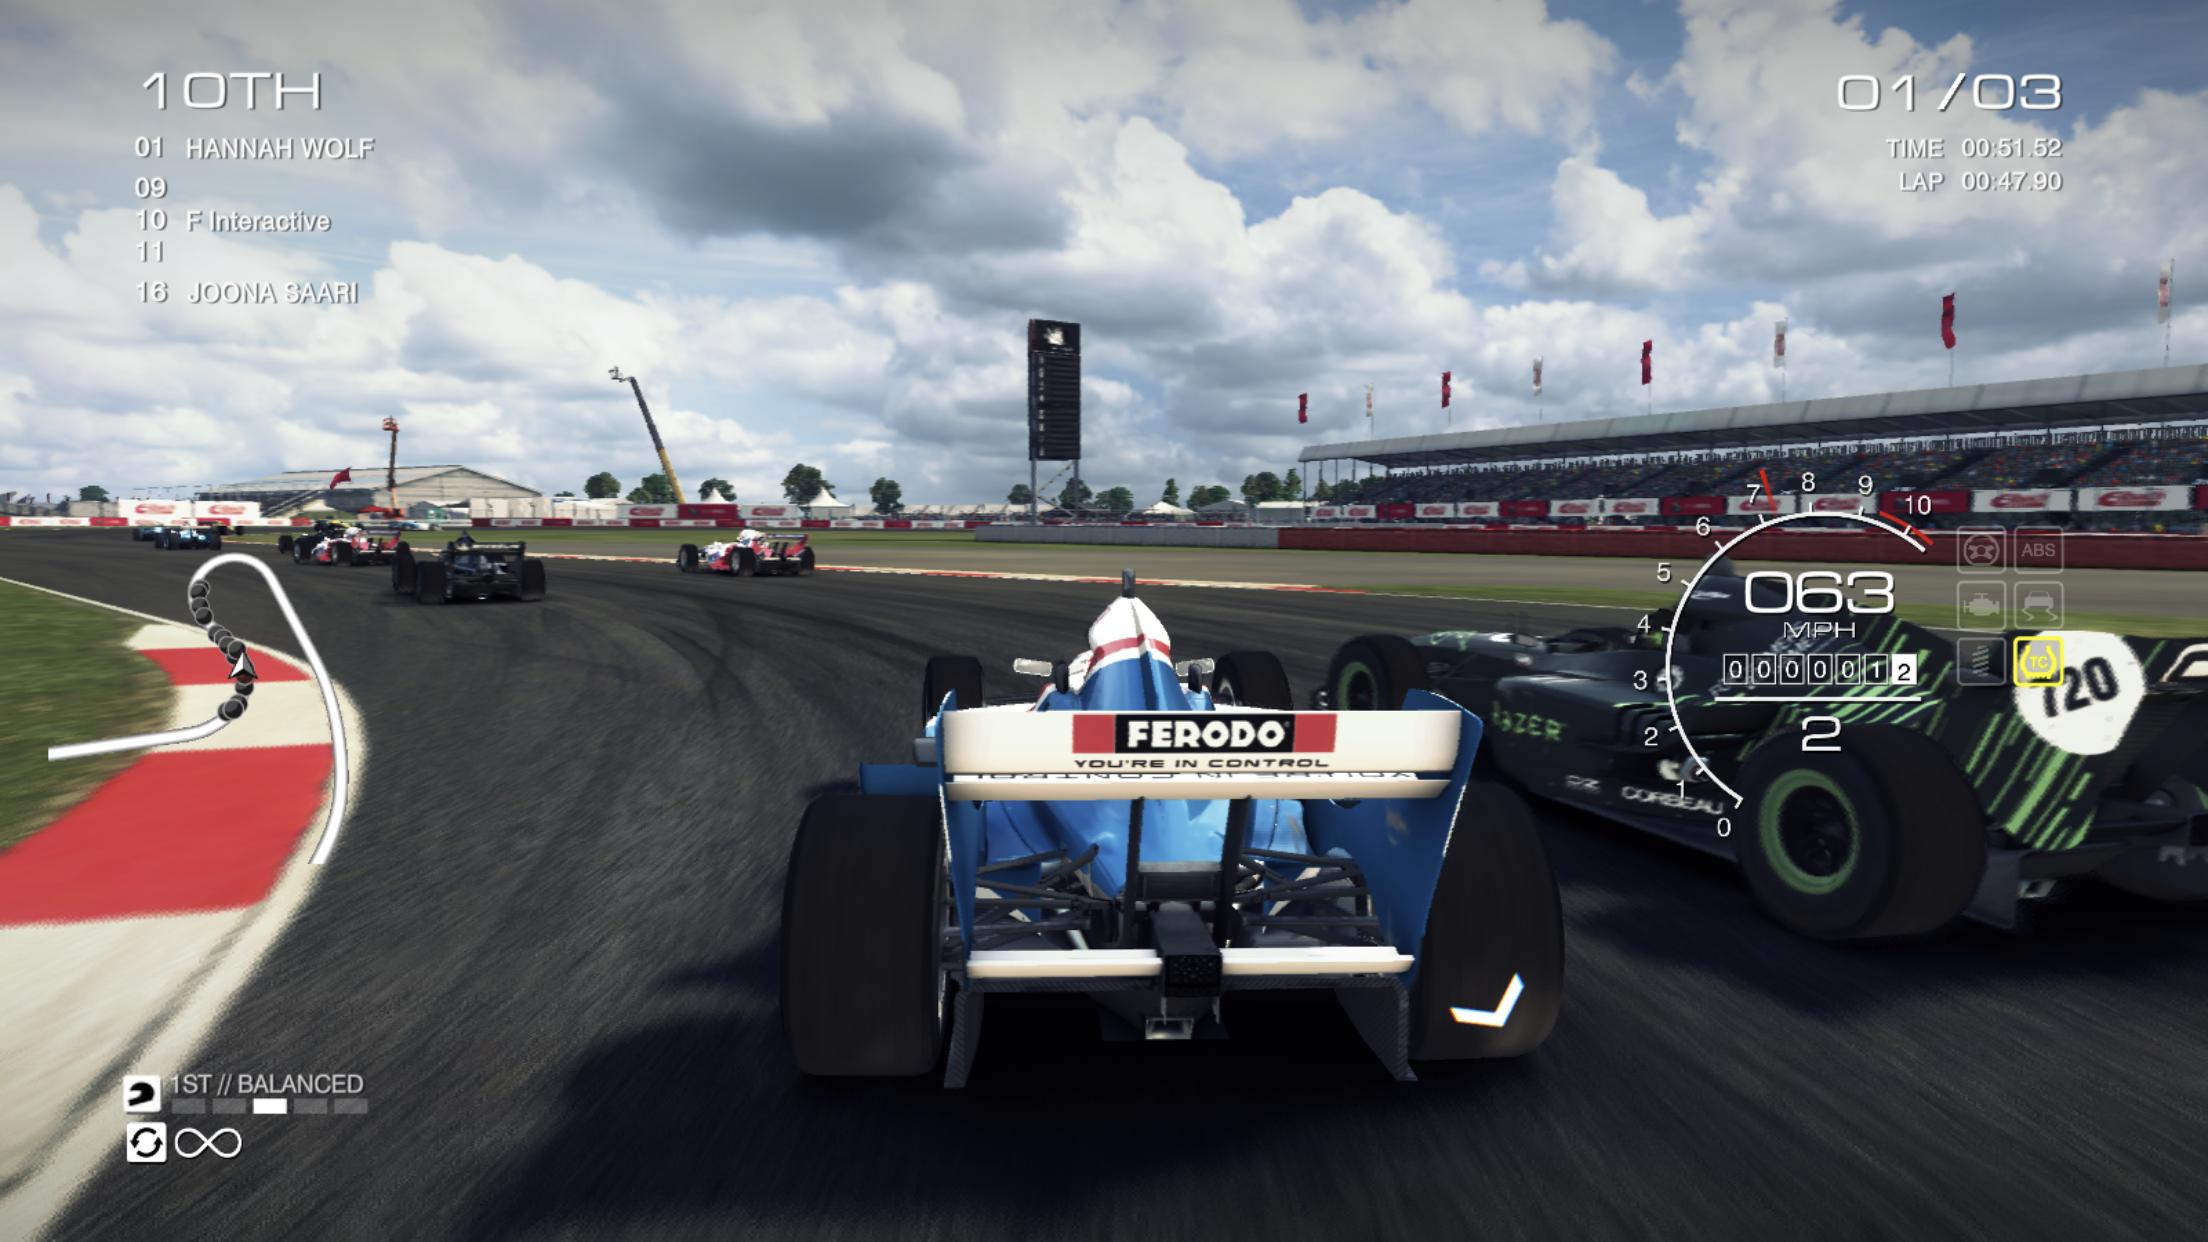 GRID™ Autosport - Online Multiplayer Test 1.7.2RC1-android Screenshot 5